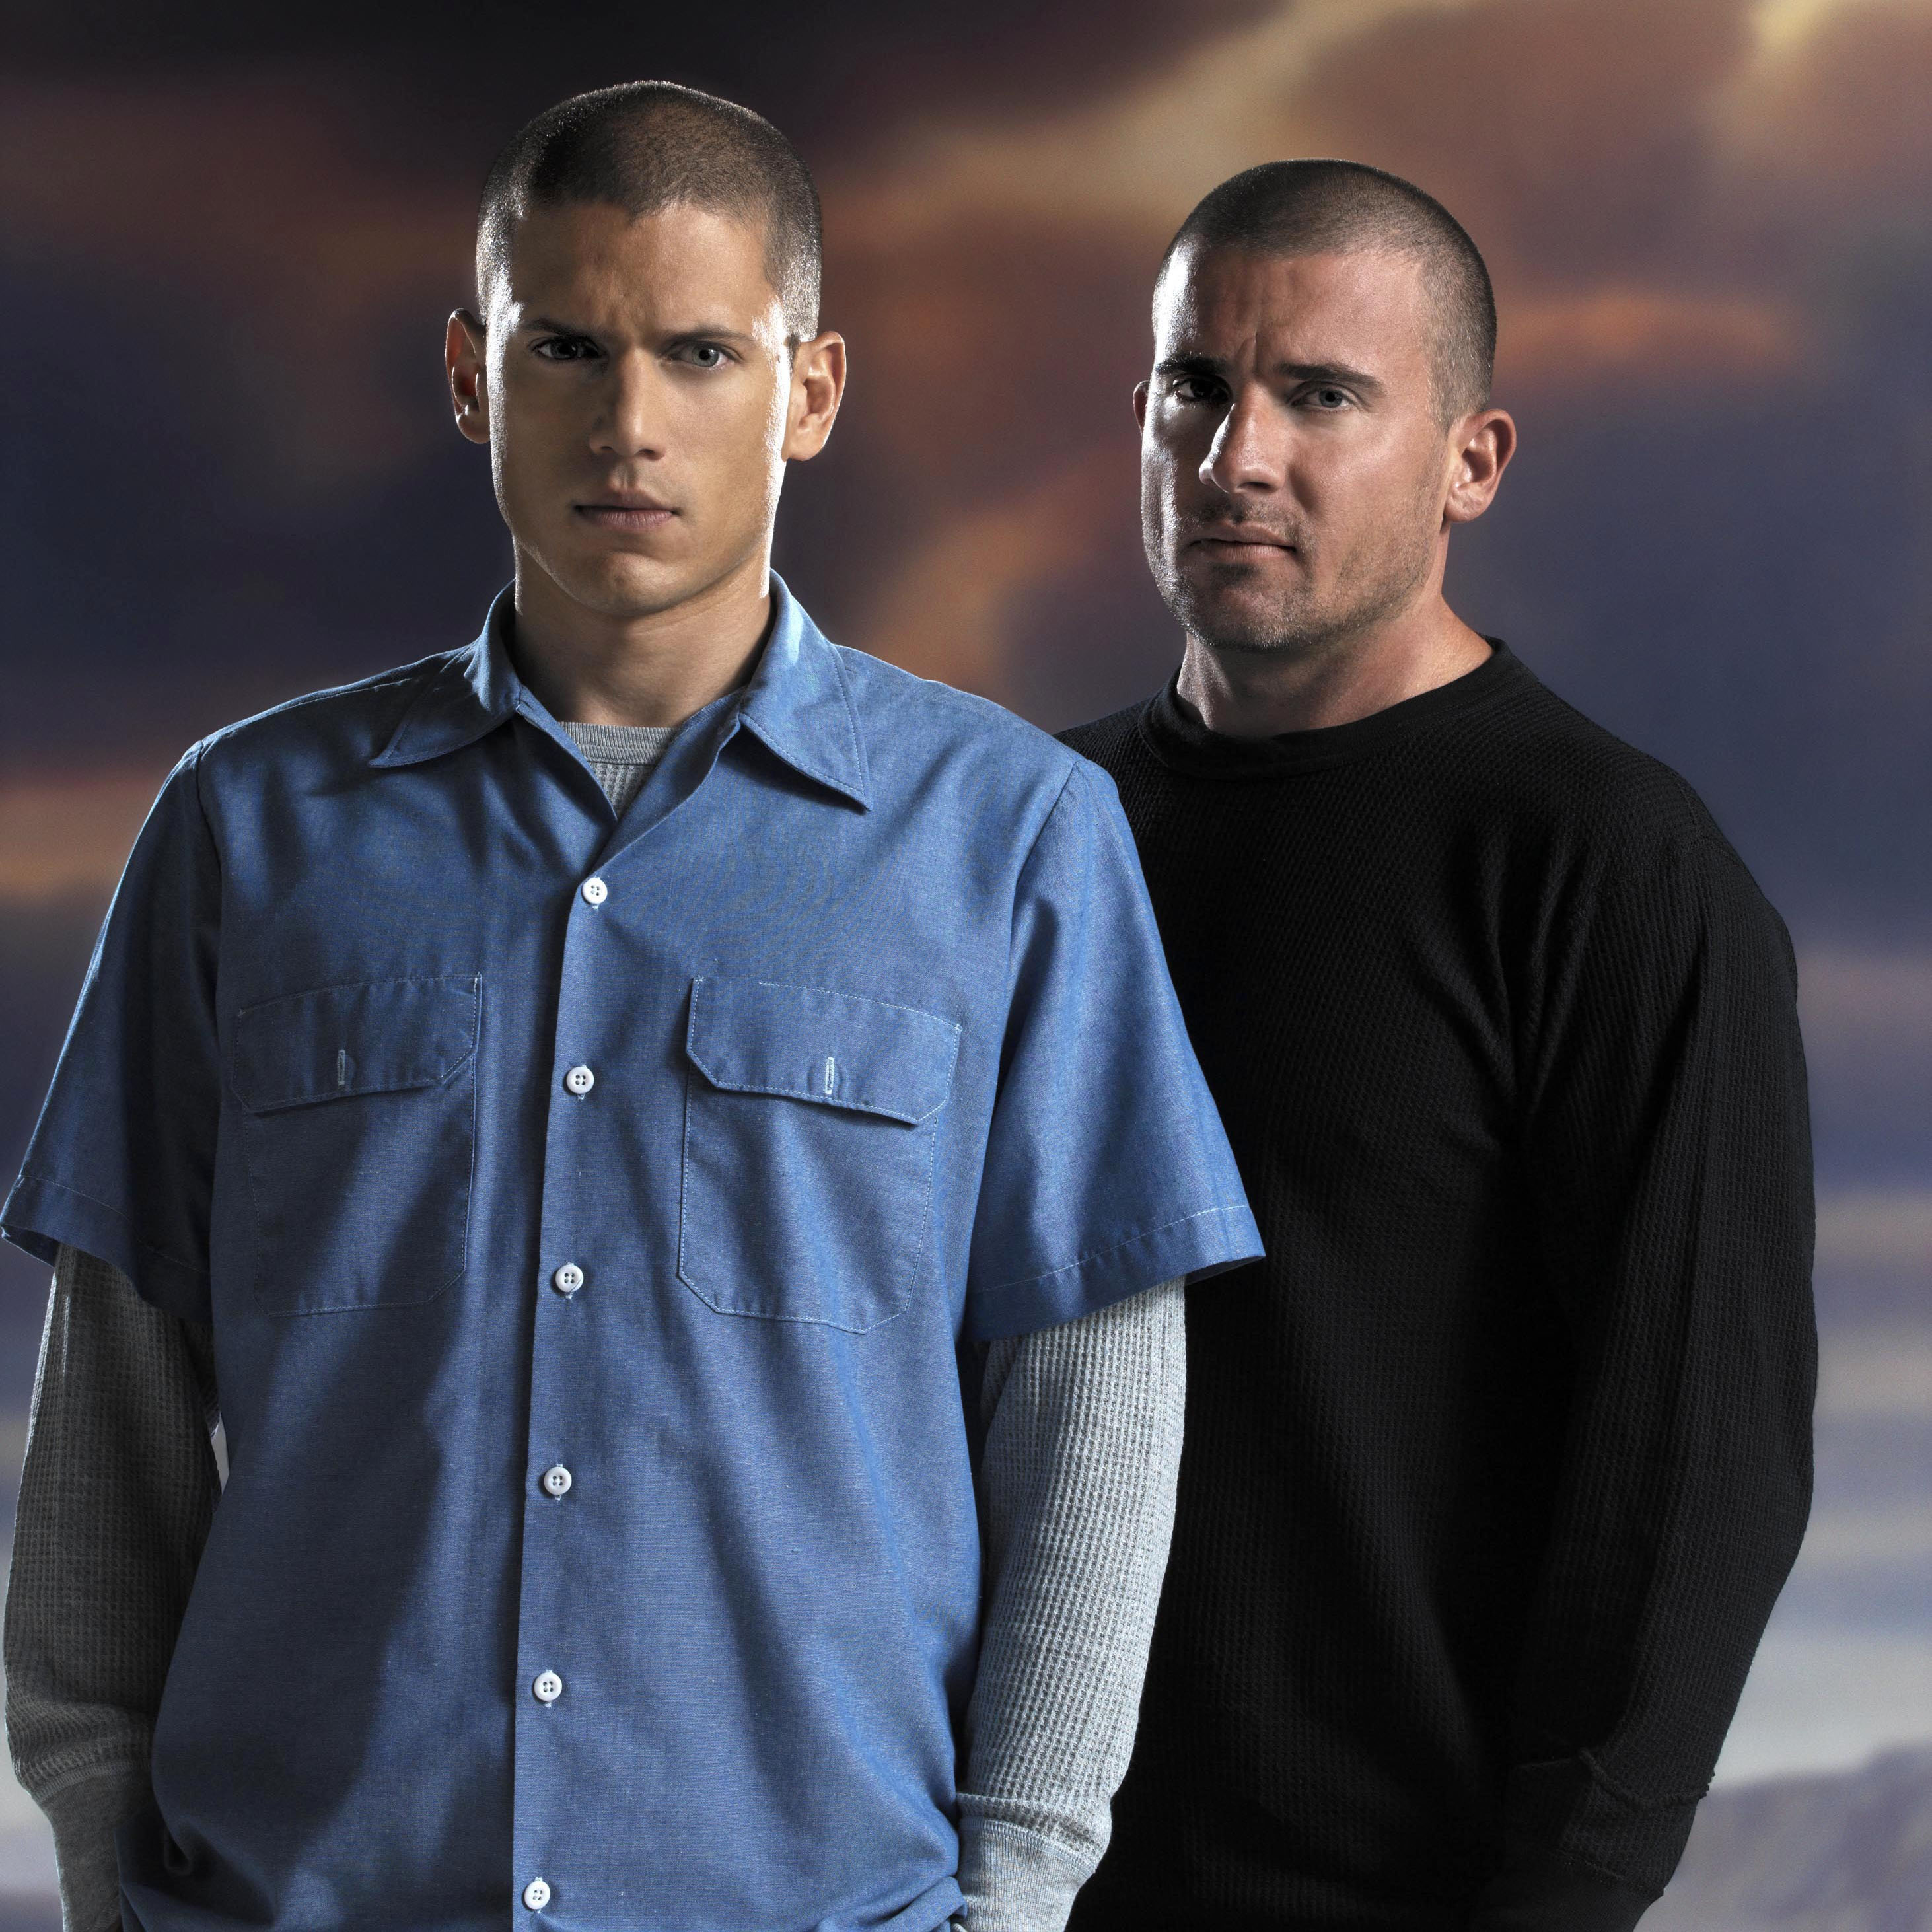 Wentworth Miller and Dominic Purcell reprised their roles as Michael Scofield and Lincoln Burrows in a Prison Break revival.